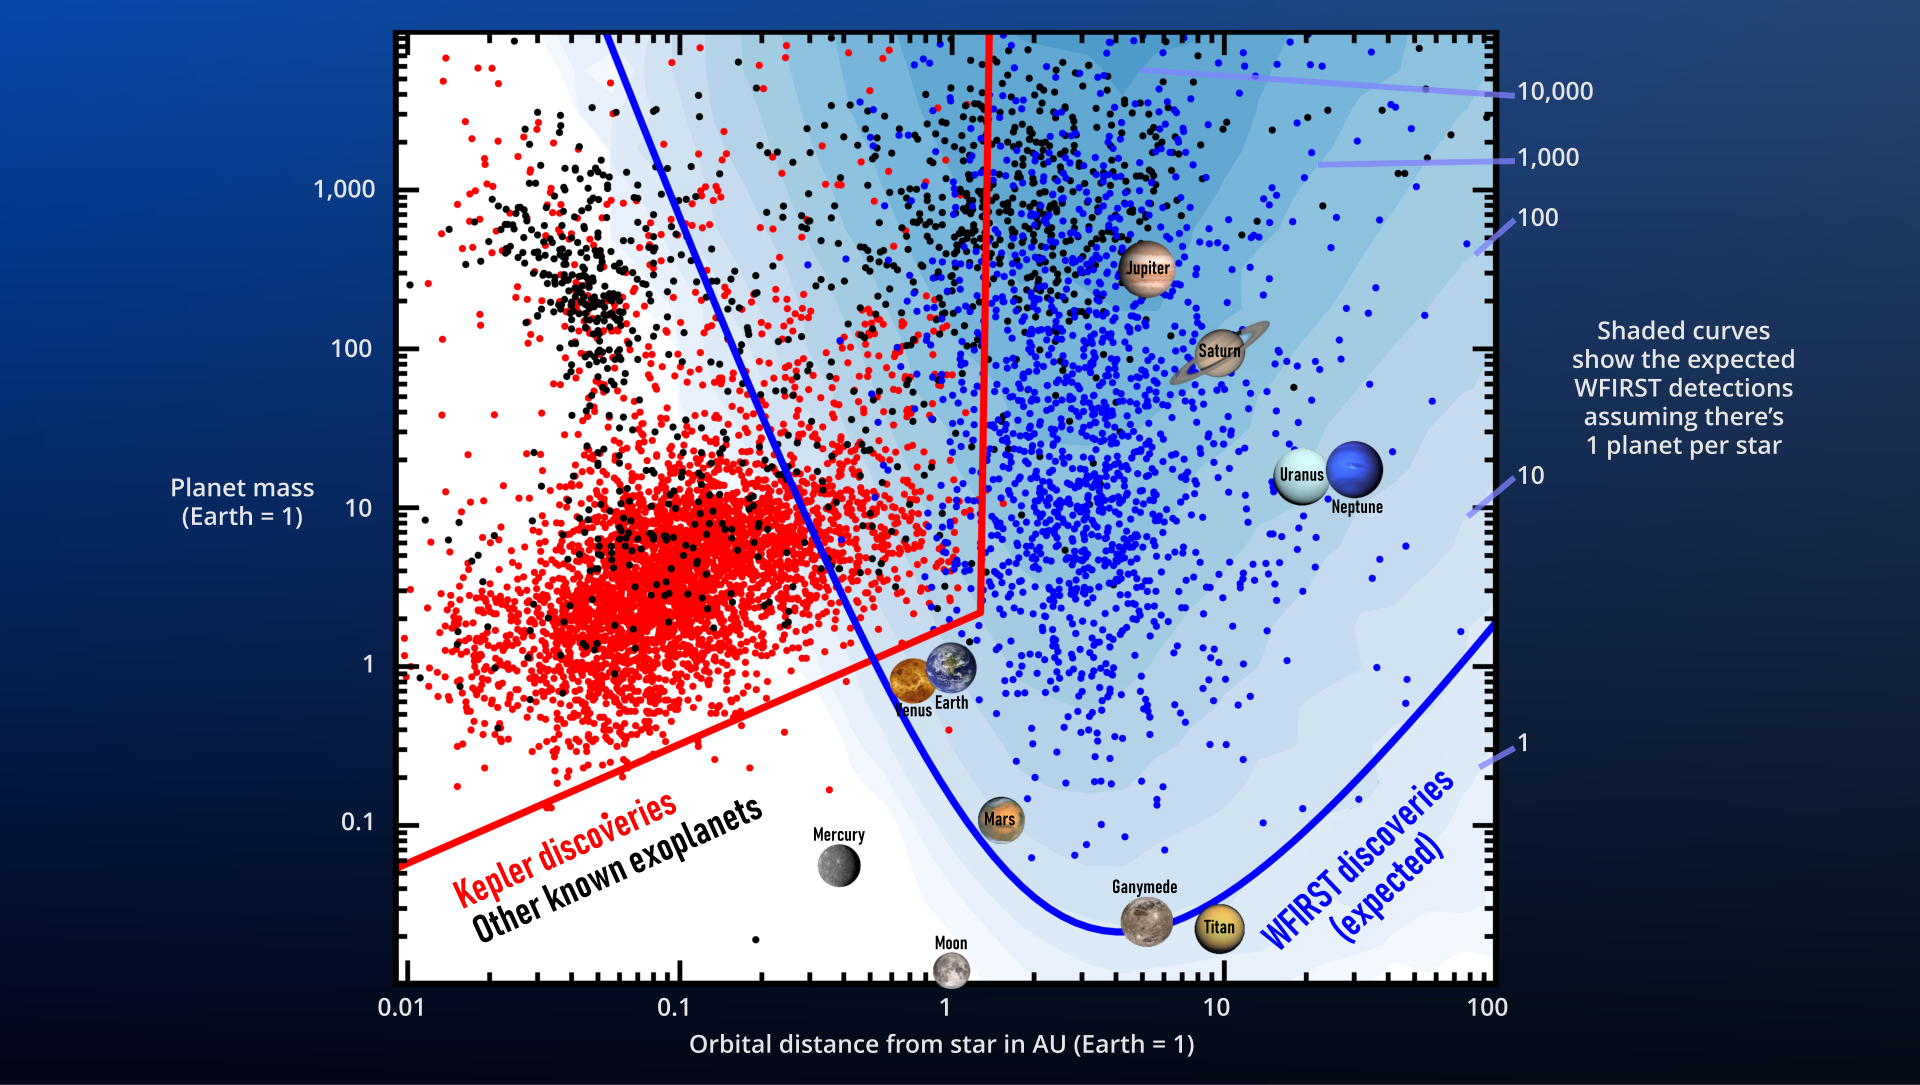 scatter plot of exoplanet discoveries, graphed by their size and distance from host stars